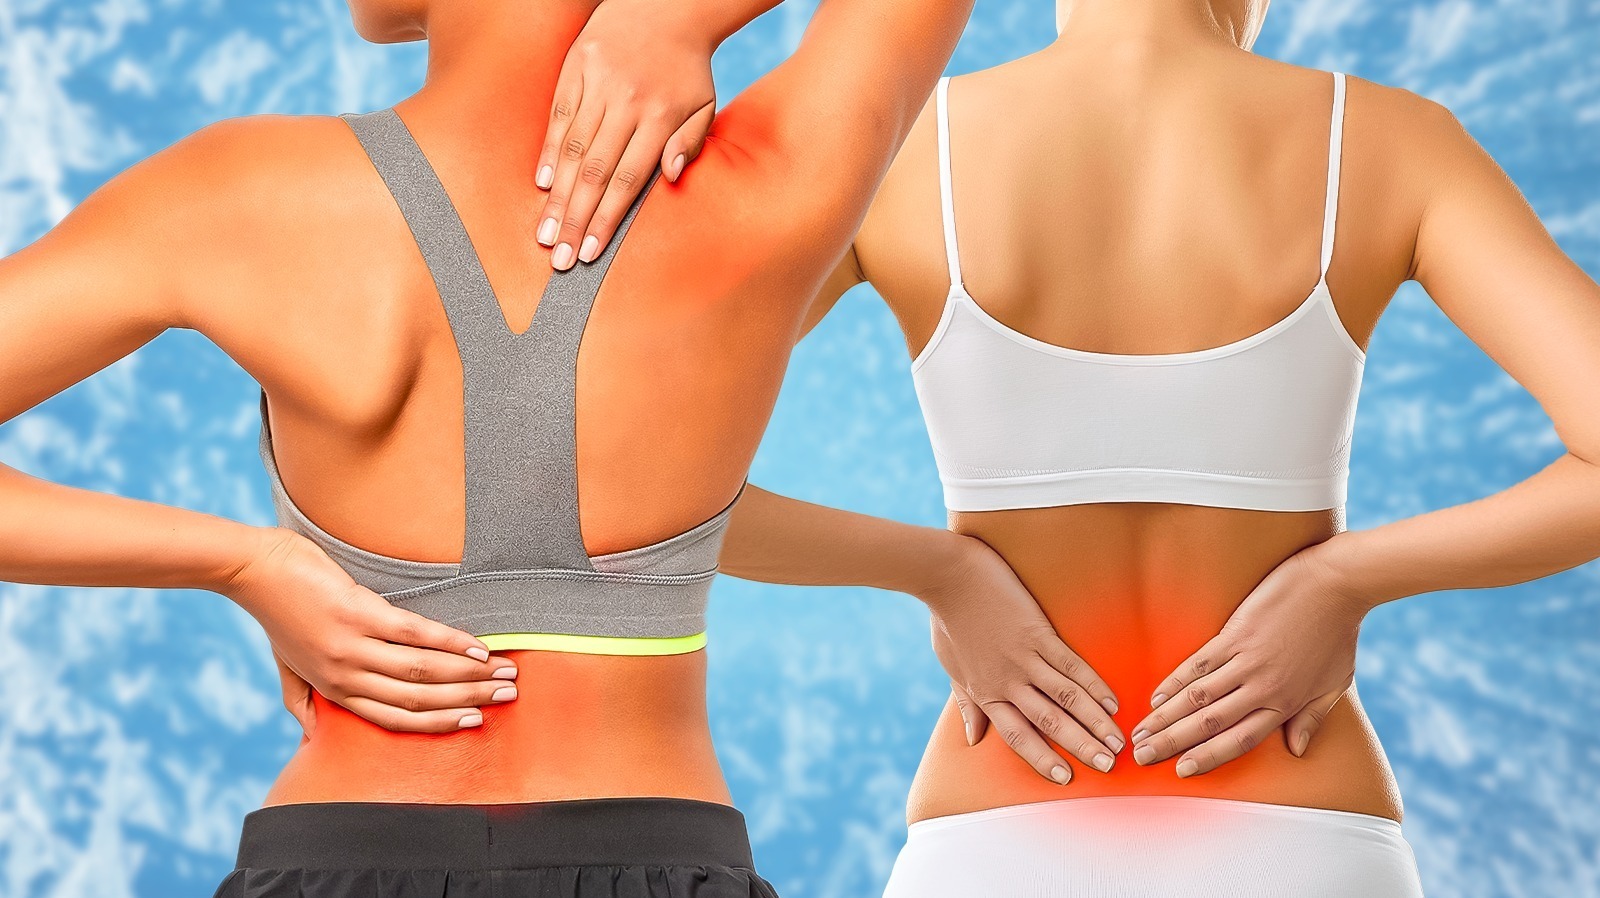 Experiencing back pain while wearing a bra? Discover tips